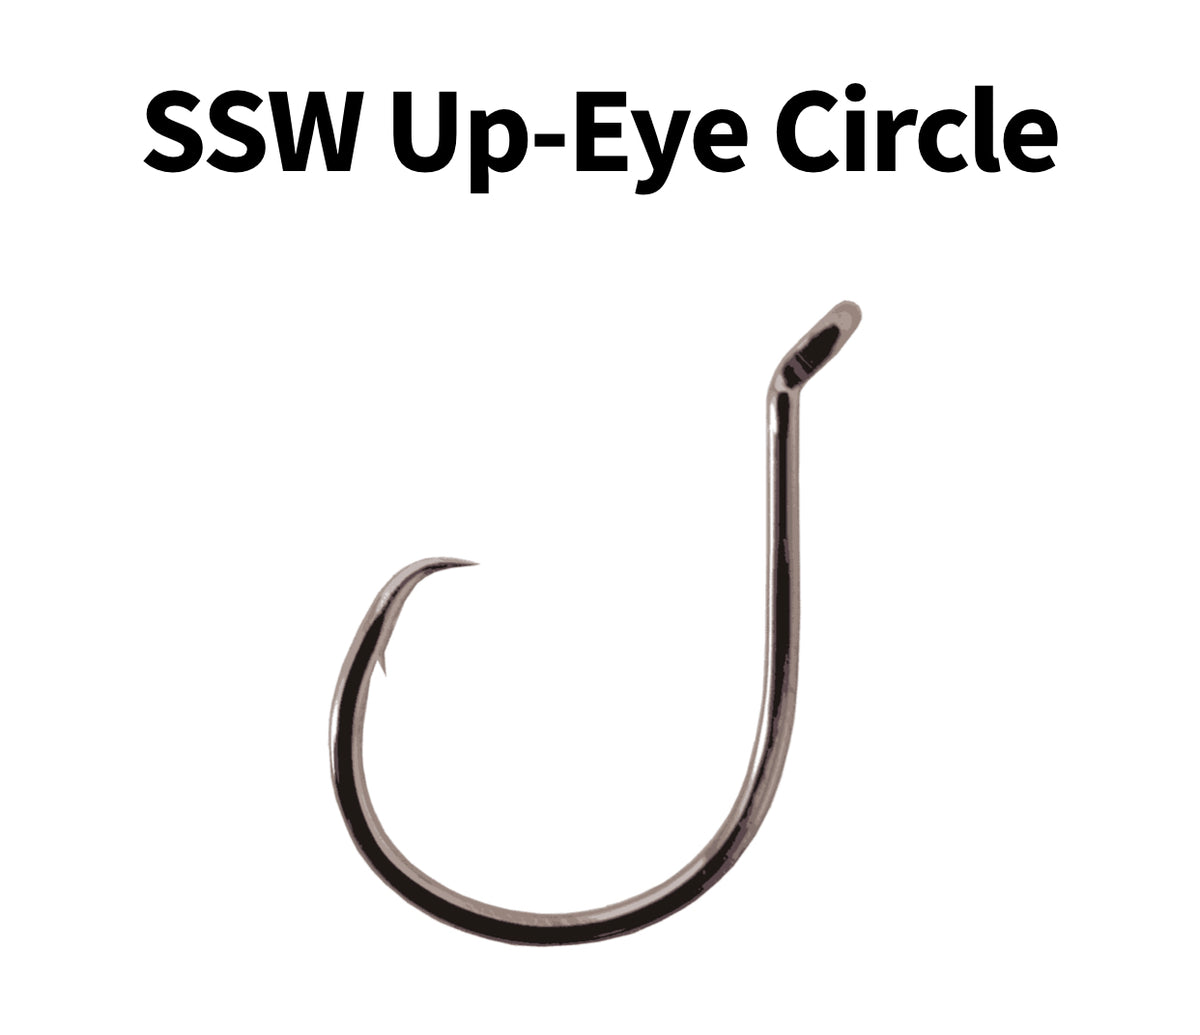  Owner American Corp SSW CIrcle Hook Up Eye 8/0 Blk Chrome Pro  Pack 27per pk #5378-181 : Fishing Hooks : Sports & Outdoors